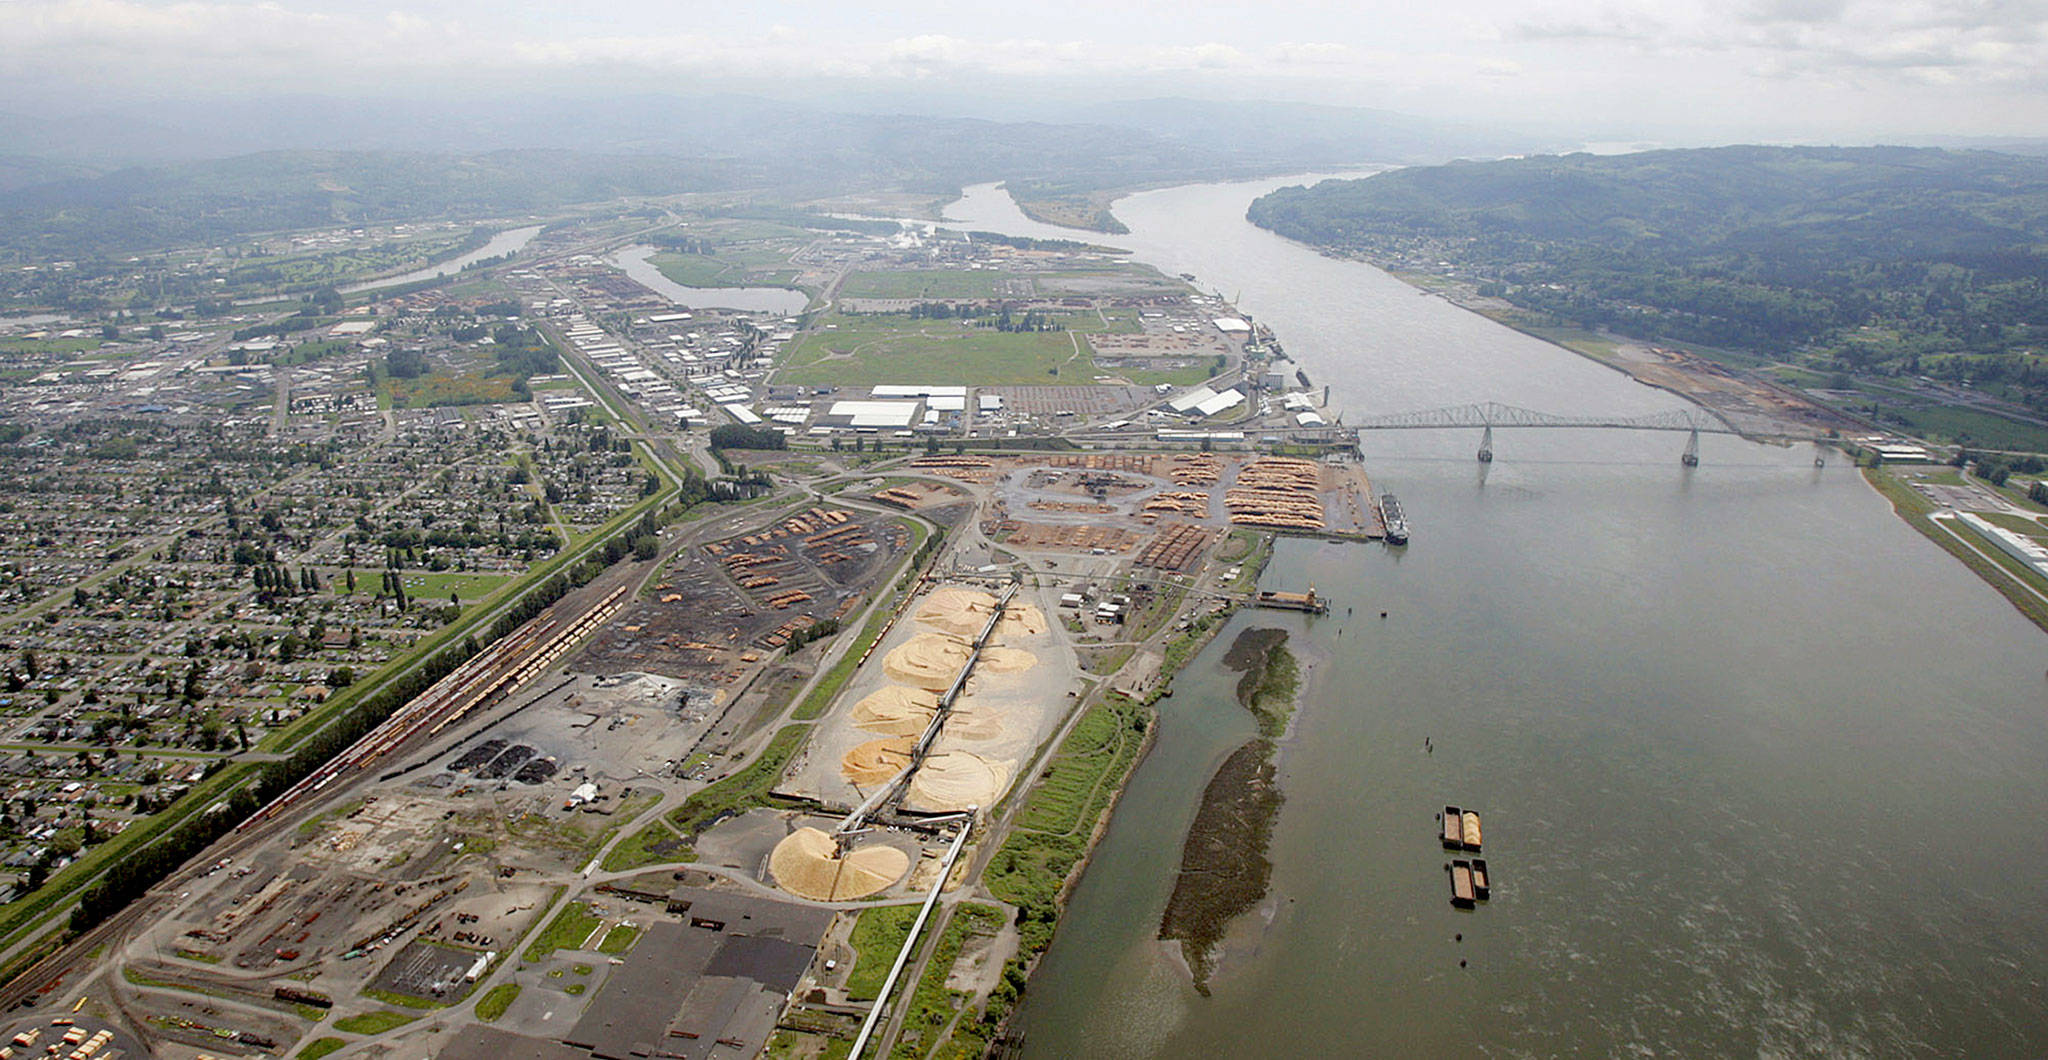 Timber-processing facilities line the banks of the Columbia River near the Port of Longview in Longview, Washington. A year after the state Ecology Department denied Millennium Bulk Terminals-Longview a key water quality permit in 2017 for a controversial coal-export project, the Army Corps of Engineers has revived an environmental review of a planned terminal on the river that would export coal to Asia. (AP Photo/Elaine Thompson, File)